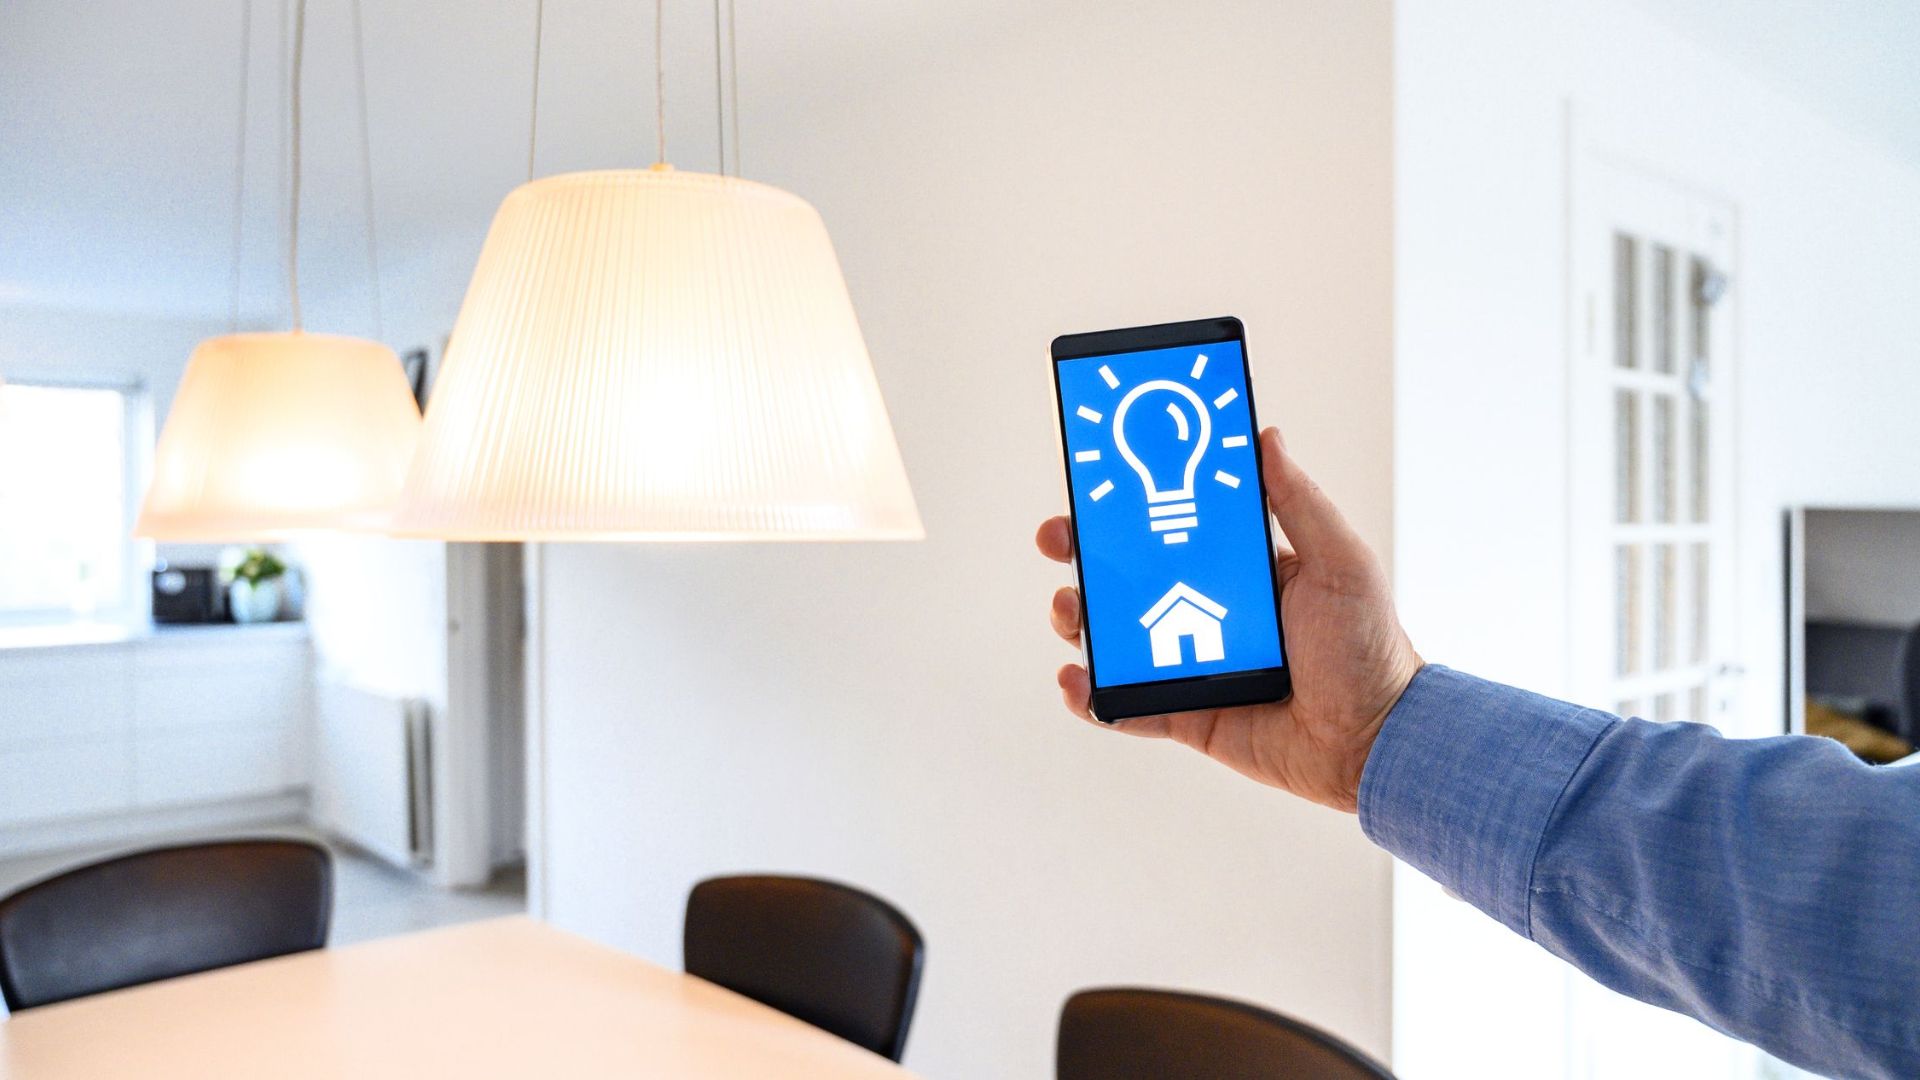 Trends in Smart Home and Lighting Systems